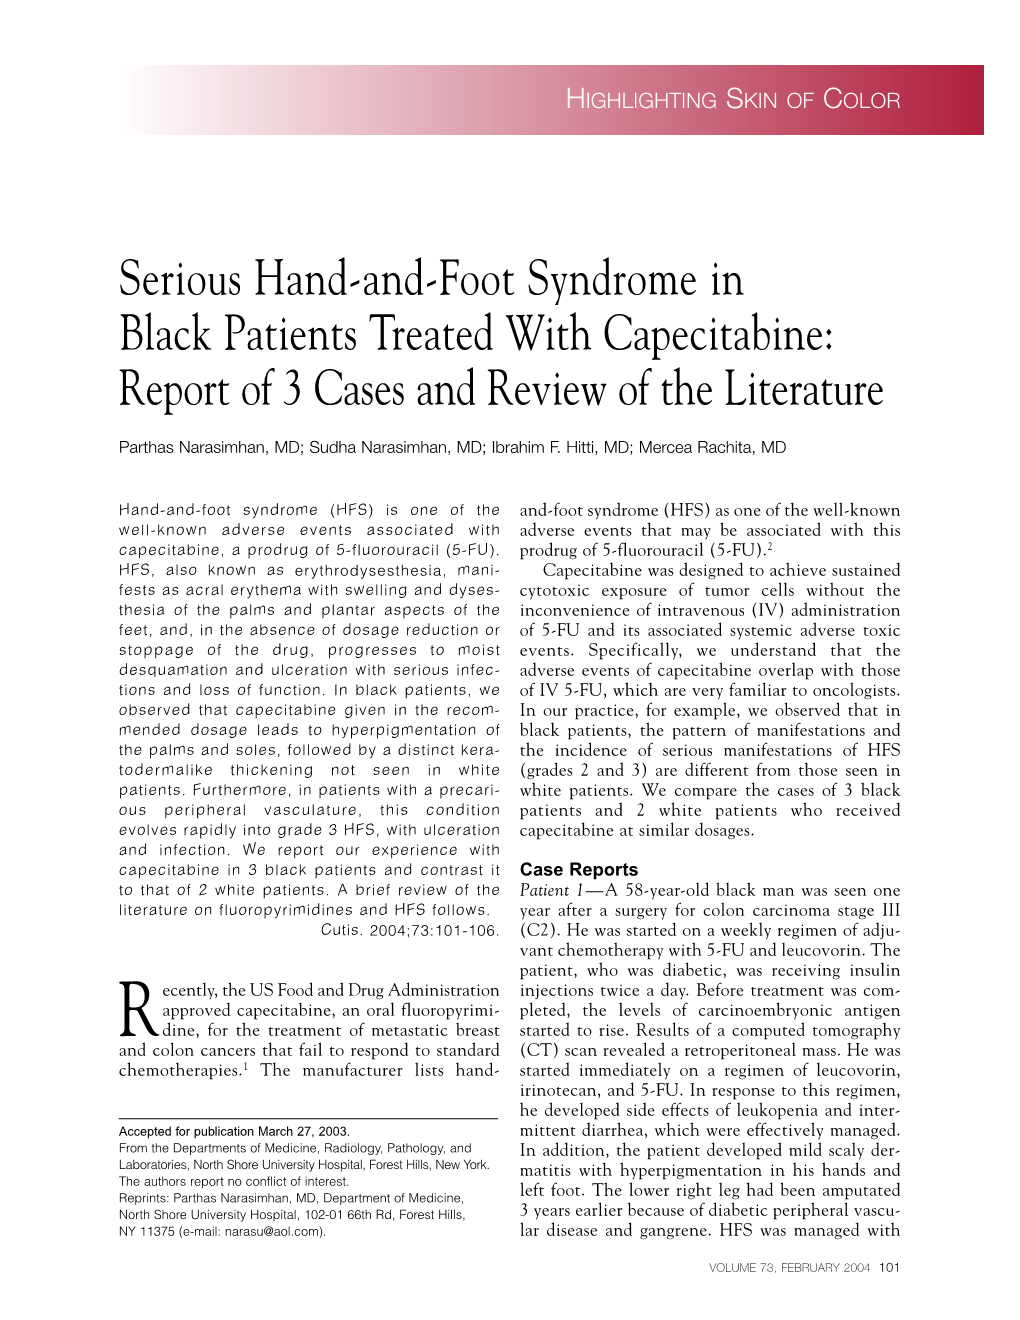 Serious Hand-And-Foot Syndrome in Black Patients Treated with Capecitabine: Report of 3 Cases and Review of the Literature